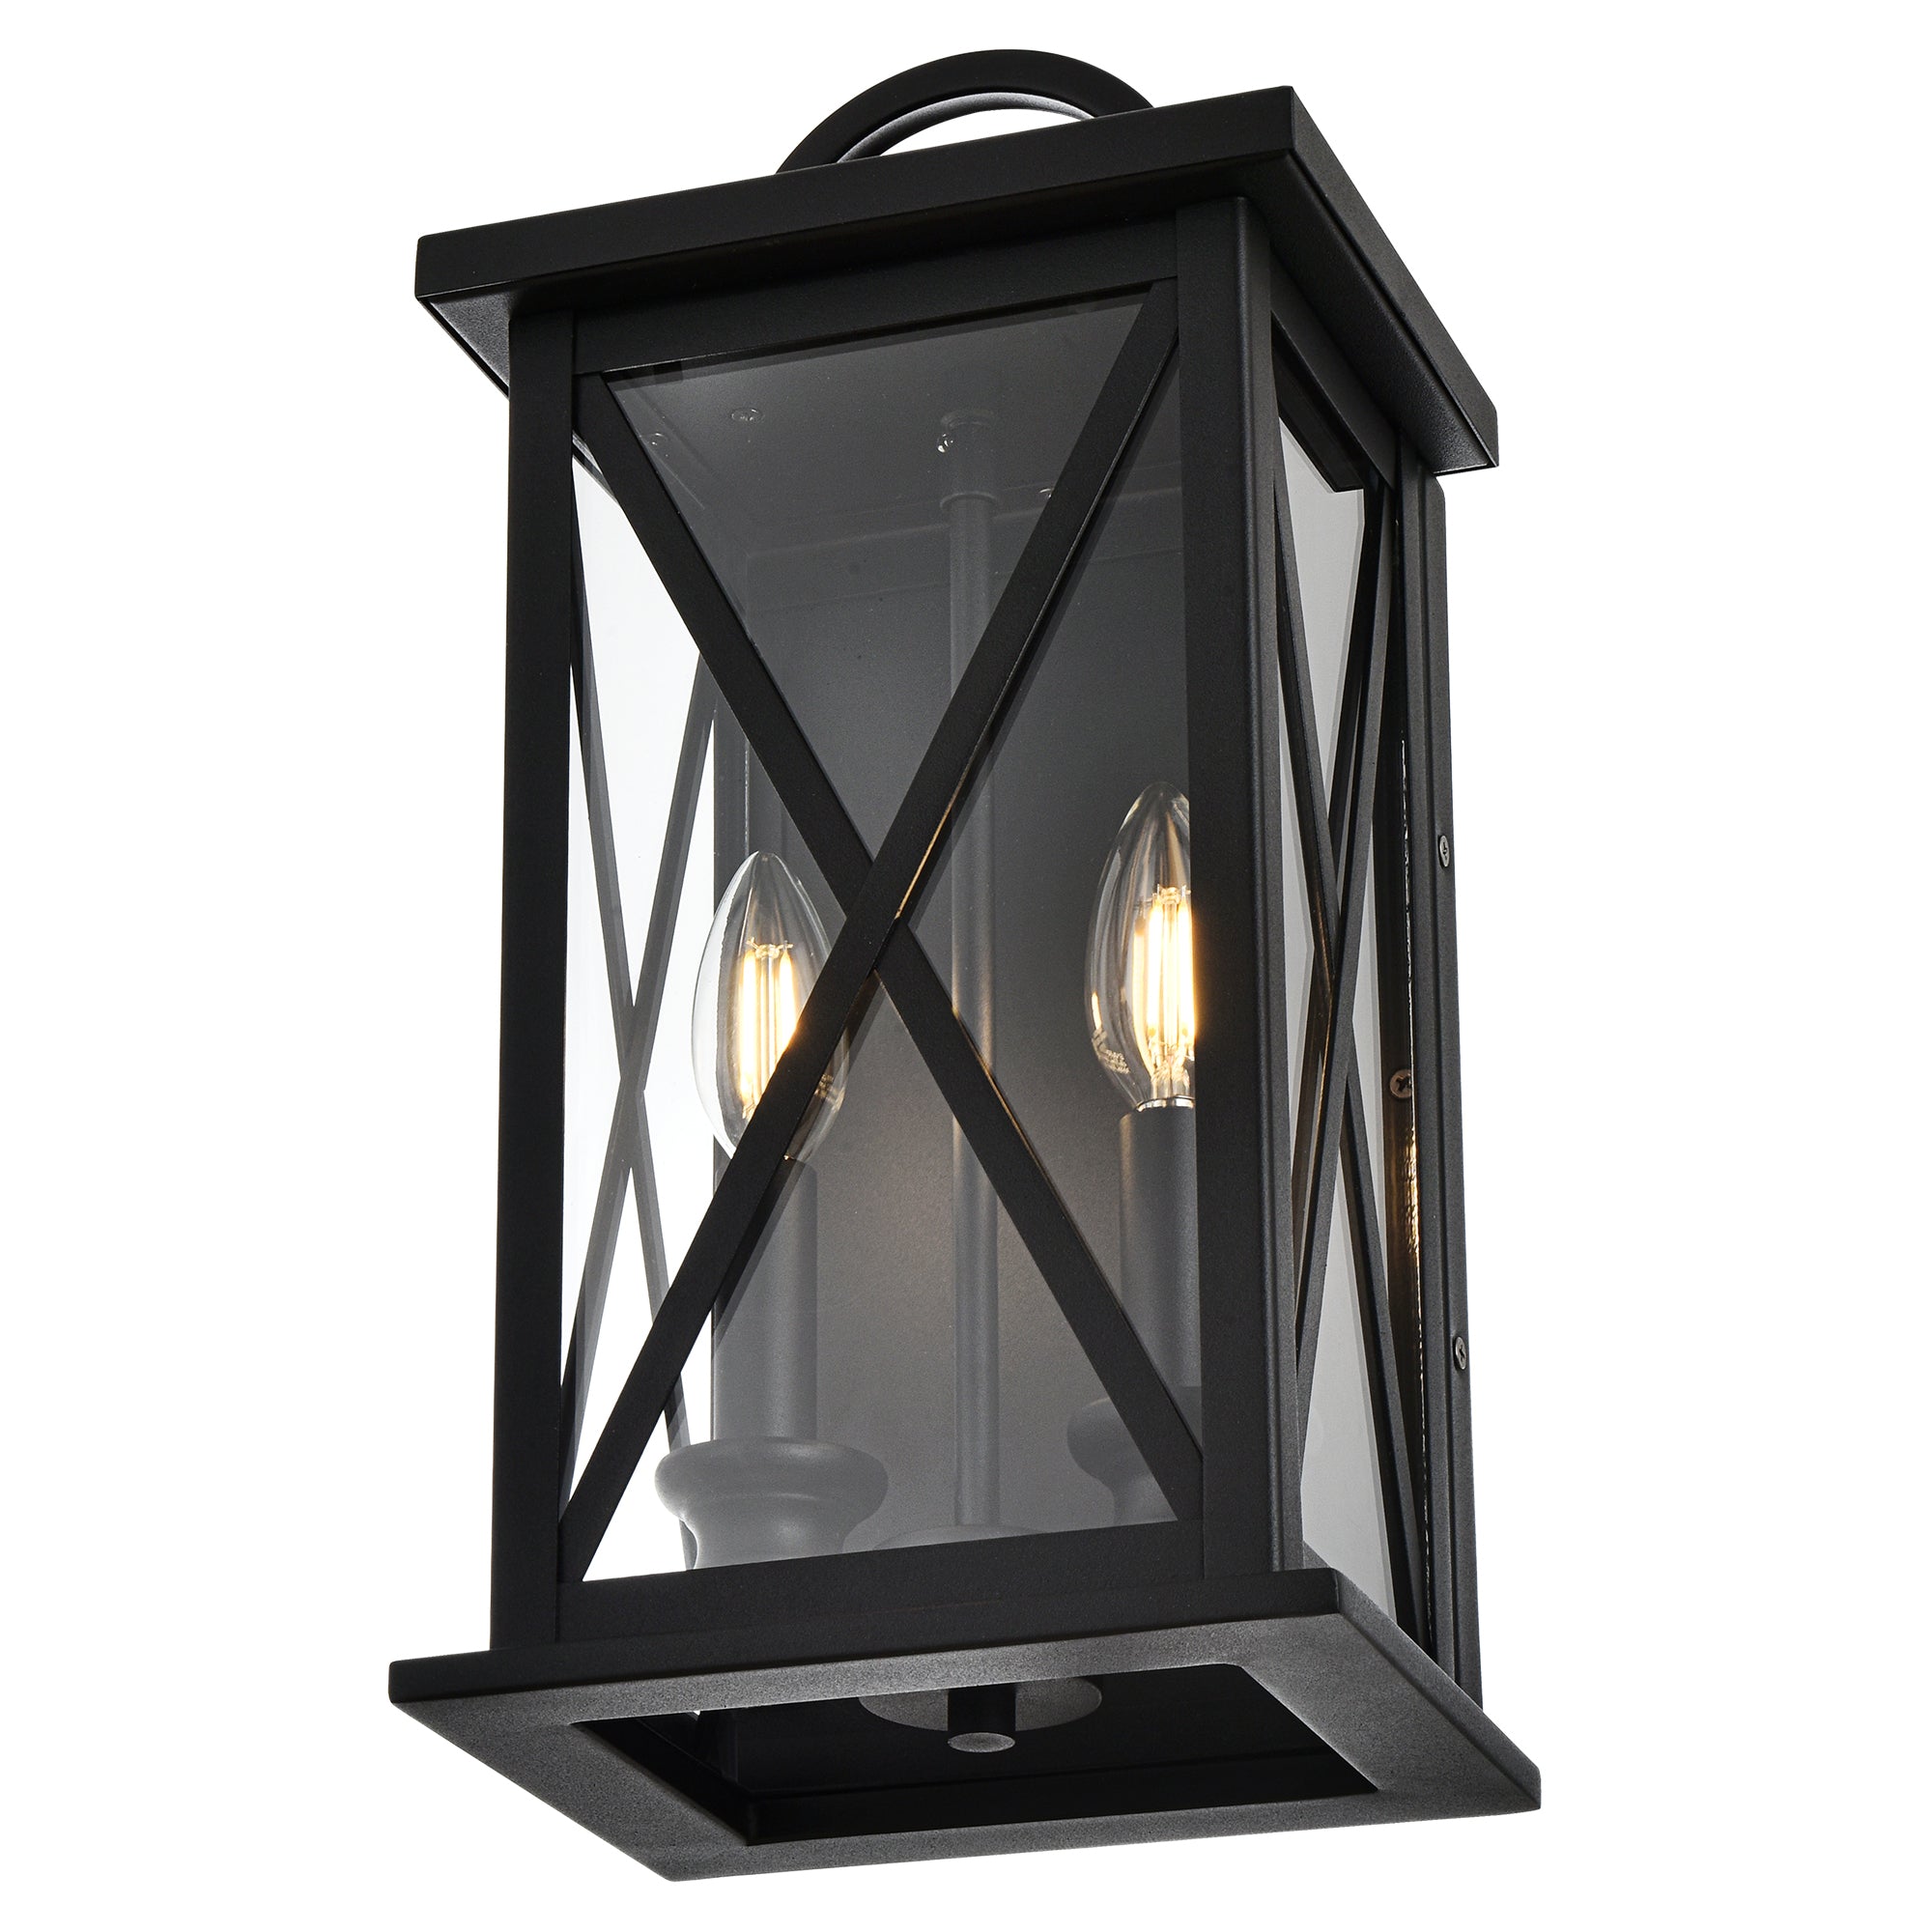 2-Light Exterior Light Fixtures Outdoor Wall Lantern Wall Mount in Black Finish Waterproof Wall Sconce with Clear Glass for Porch Front Door Patio Yard Garage